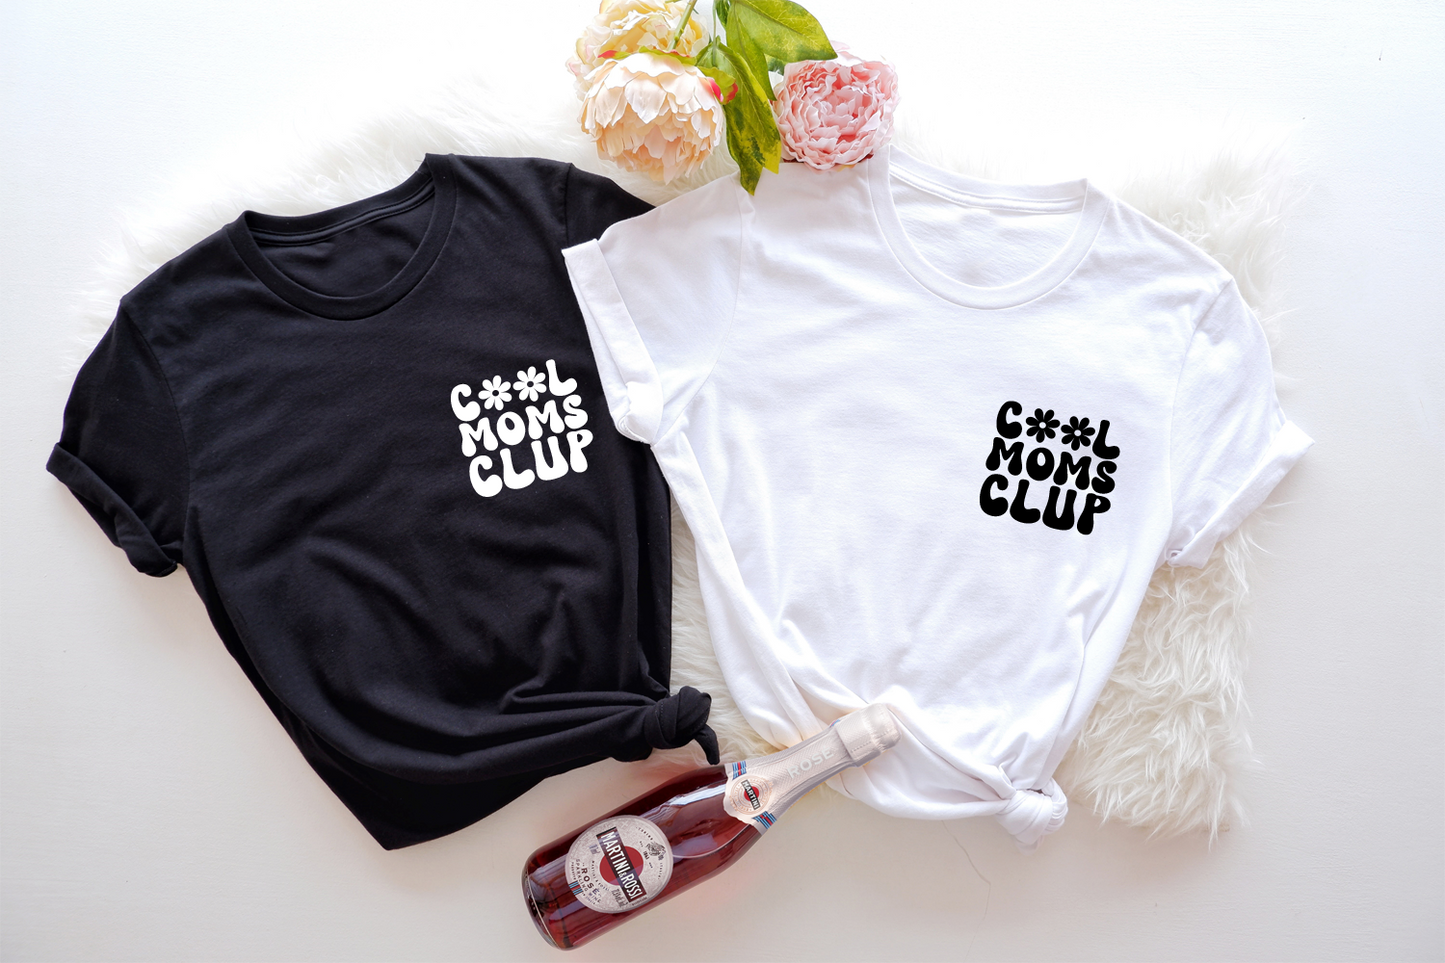 Graphic tee featuring a trendy 'Cool Moms Club' design for fun-loving and supportive moms.